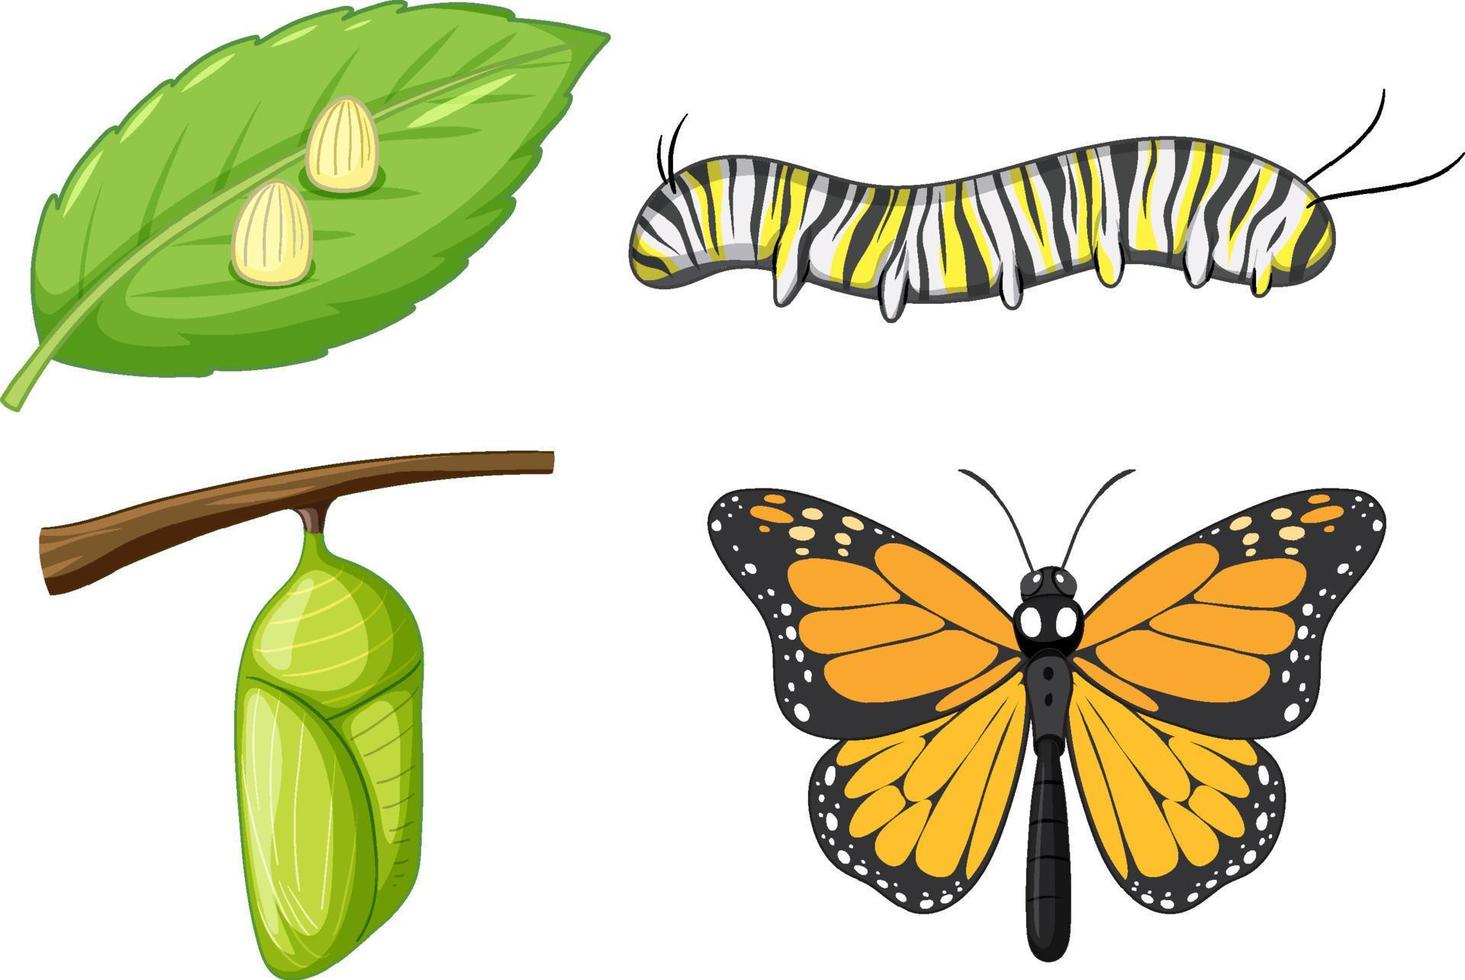 Life Cycle of Monarch Butterfly vector